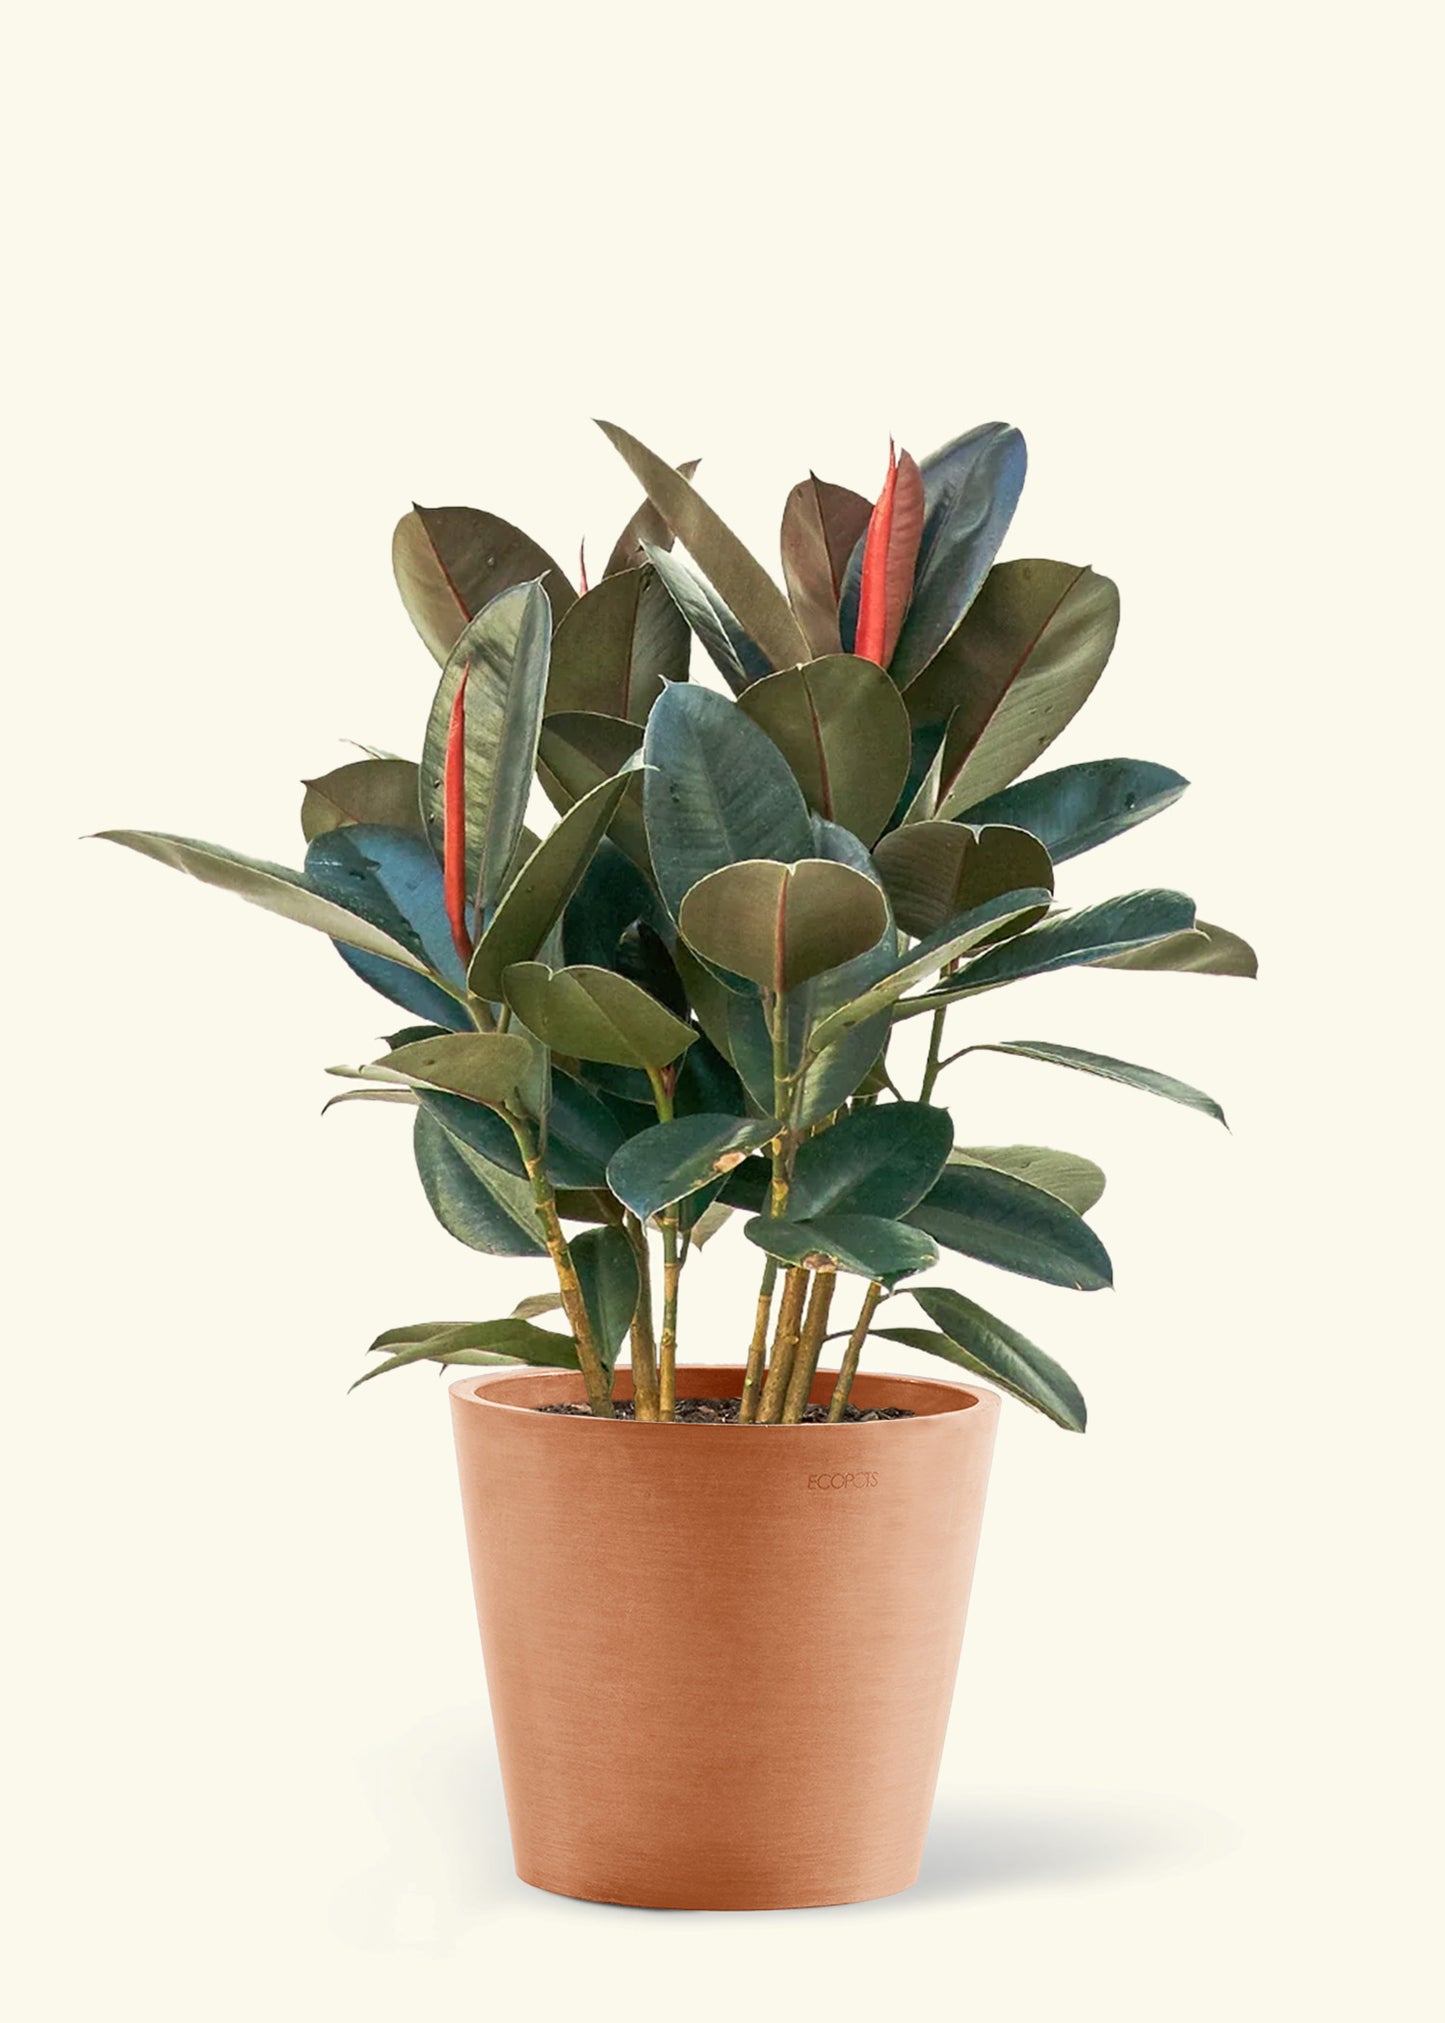 Large Rubber Tree 'Burgundy' in a terracotta pot.